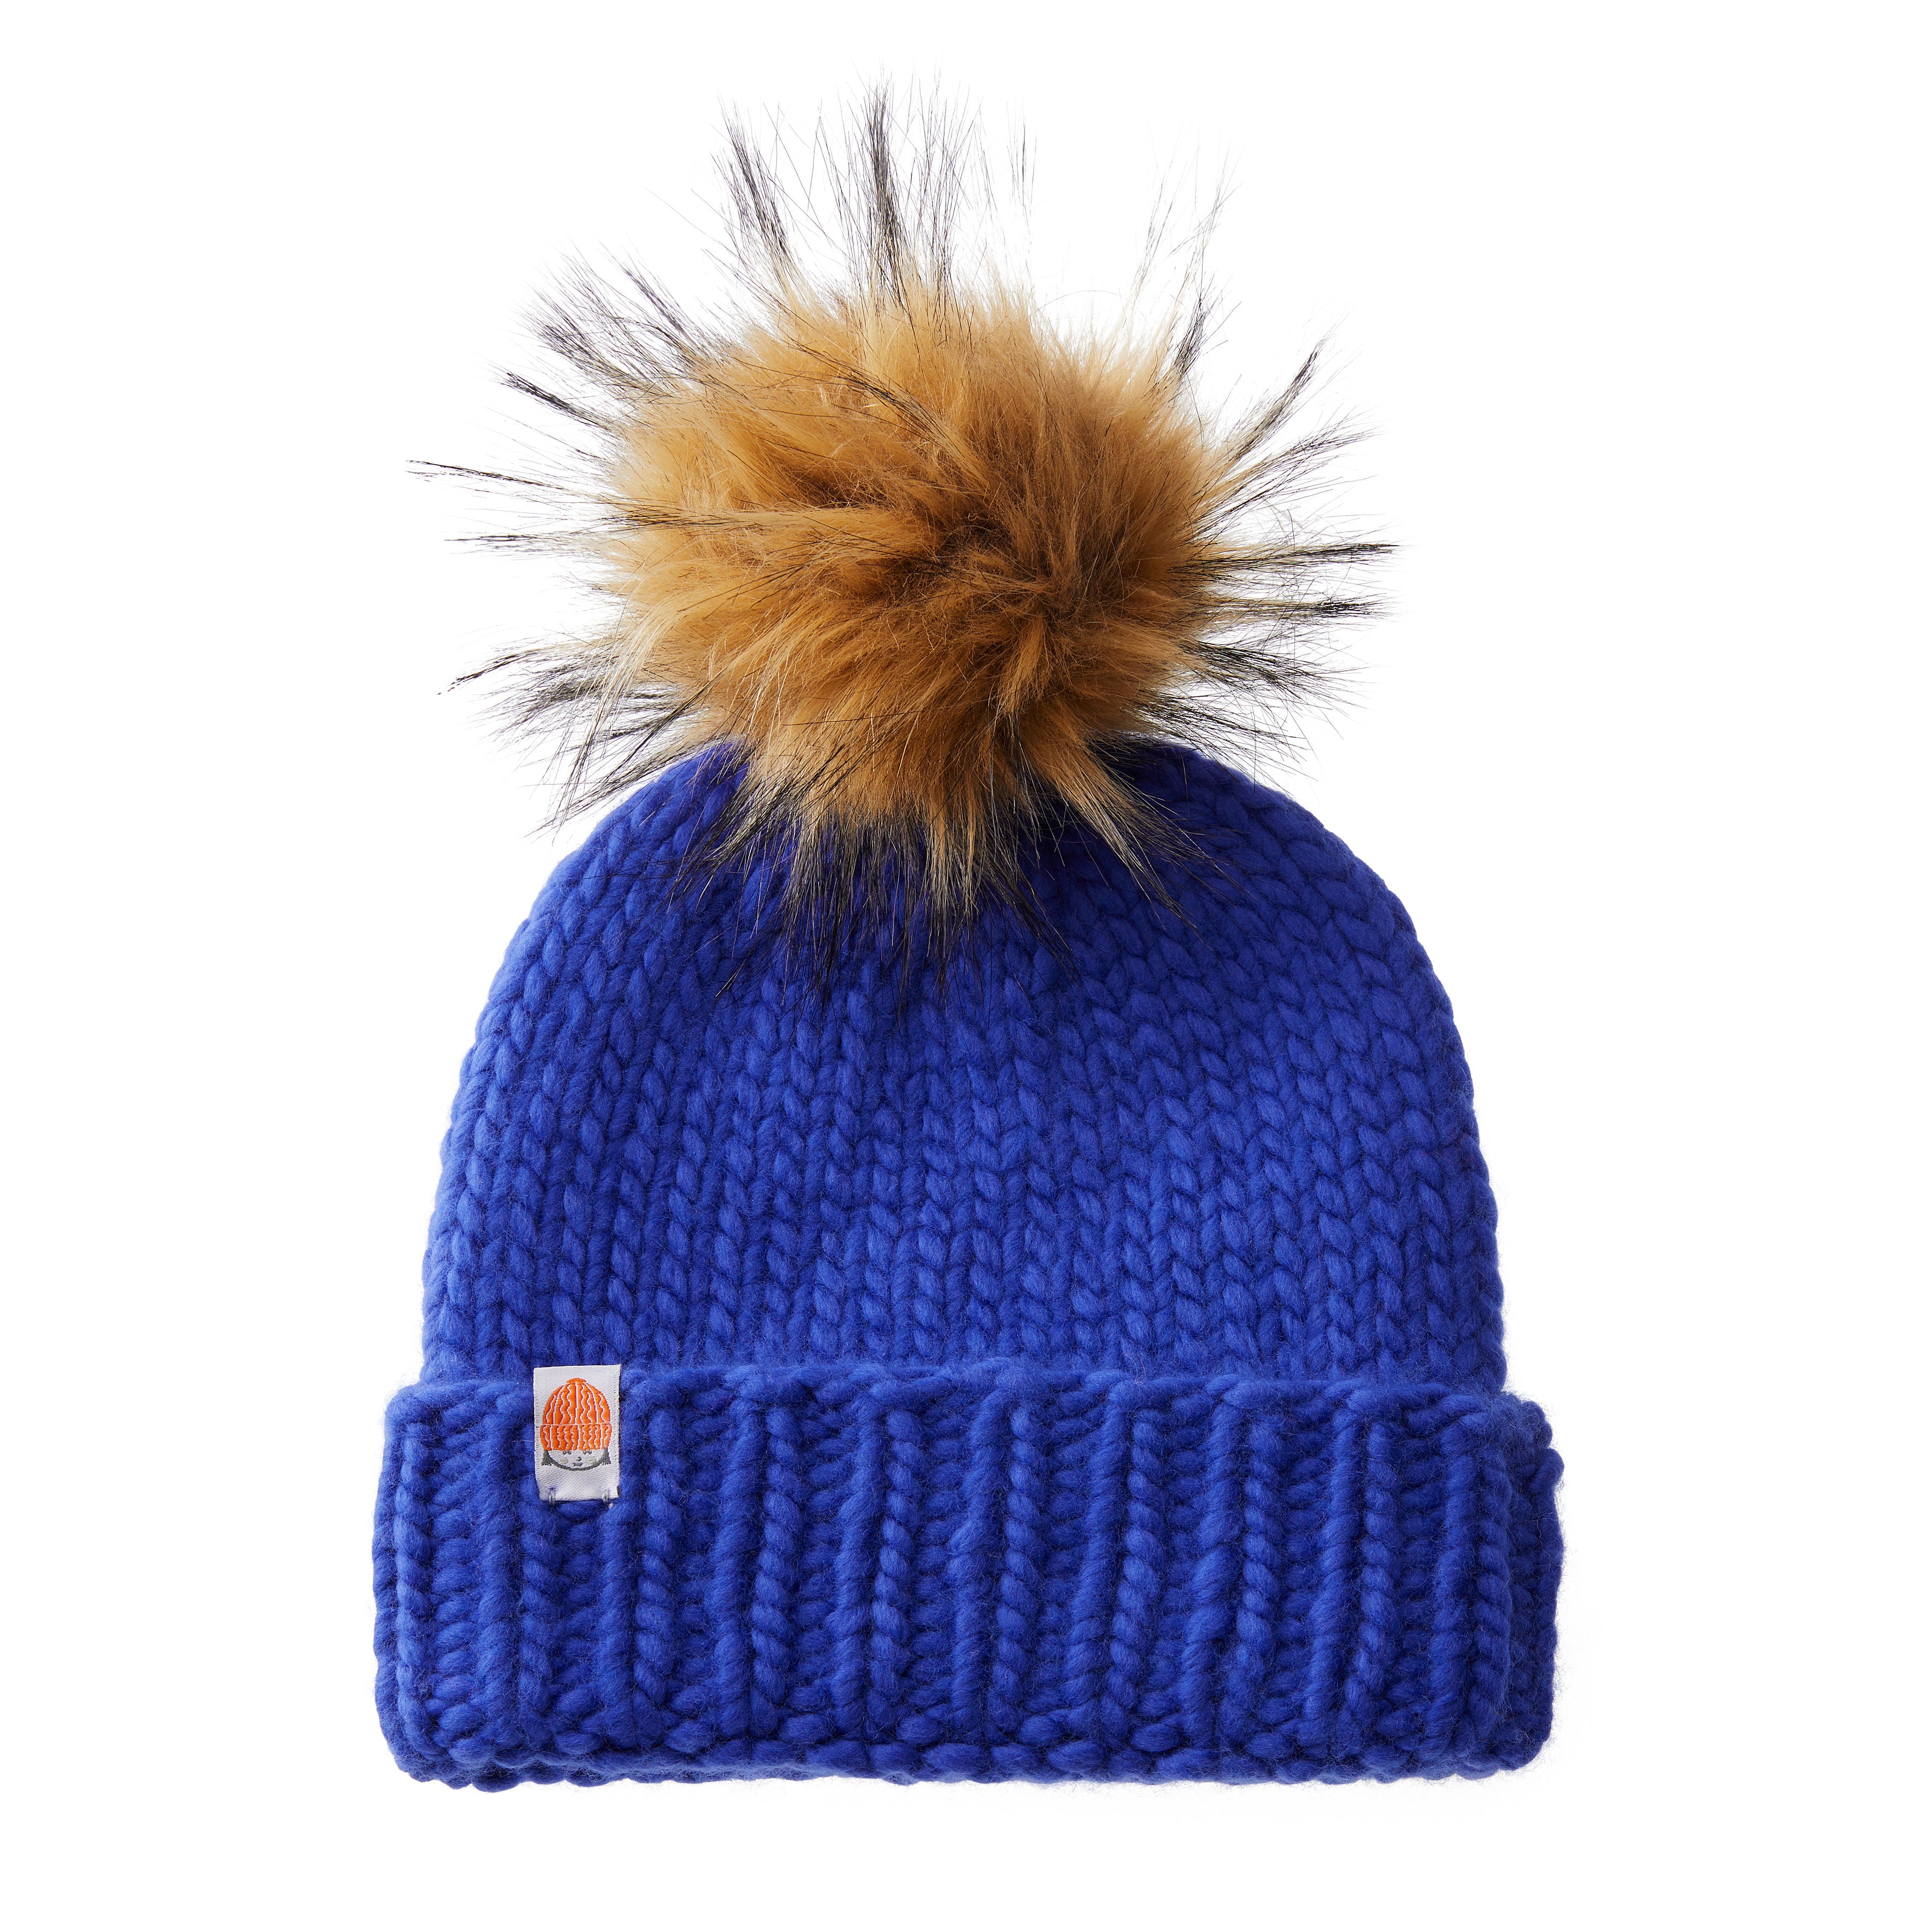 Shop The Hats Beanie Sh*t | I Wool | Knit That Merino Rutherford